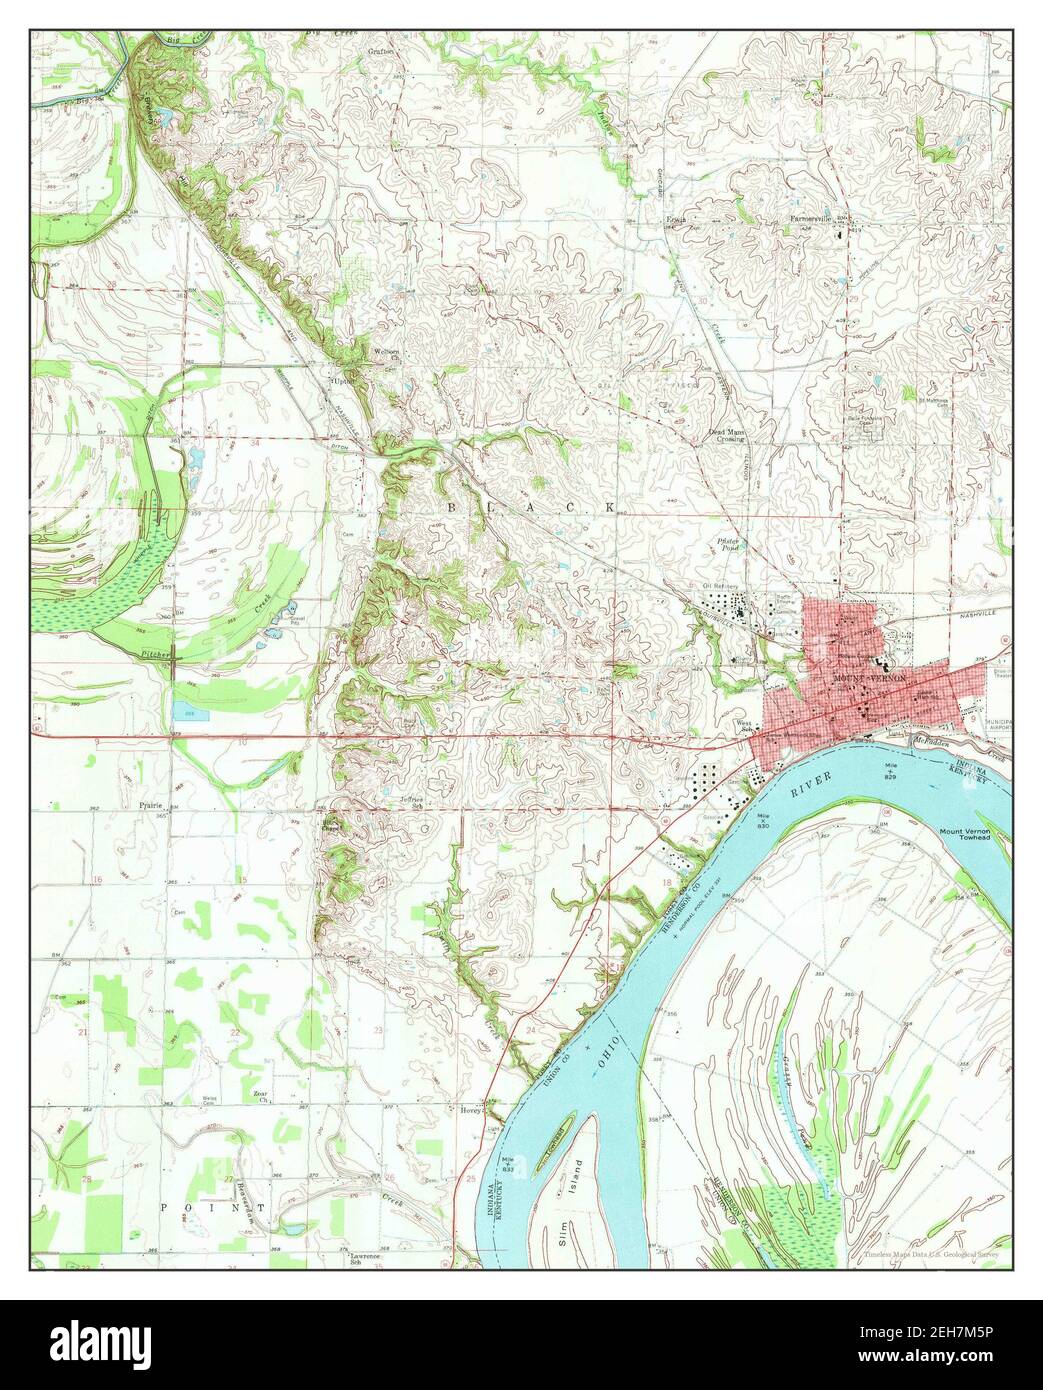 Mount Vernon, Indiana, map 1957, 1:24000, United States of America by Timeless Maps, data U.S. Geological Survey Stock Photo